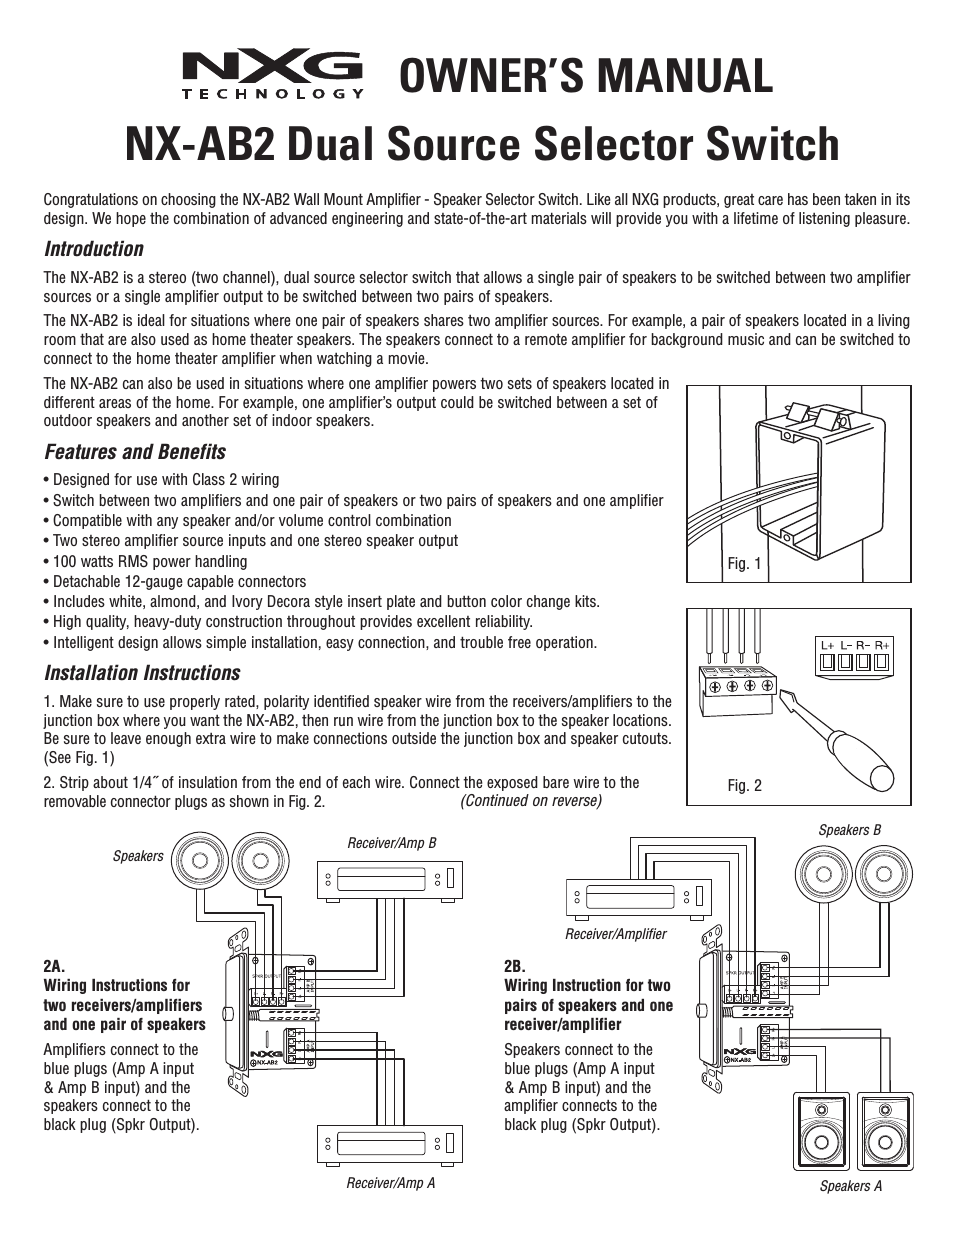 NX-AB2 Dual Source Selector Switch